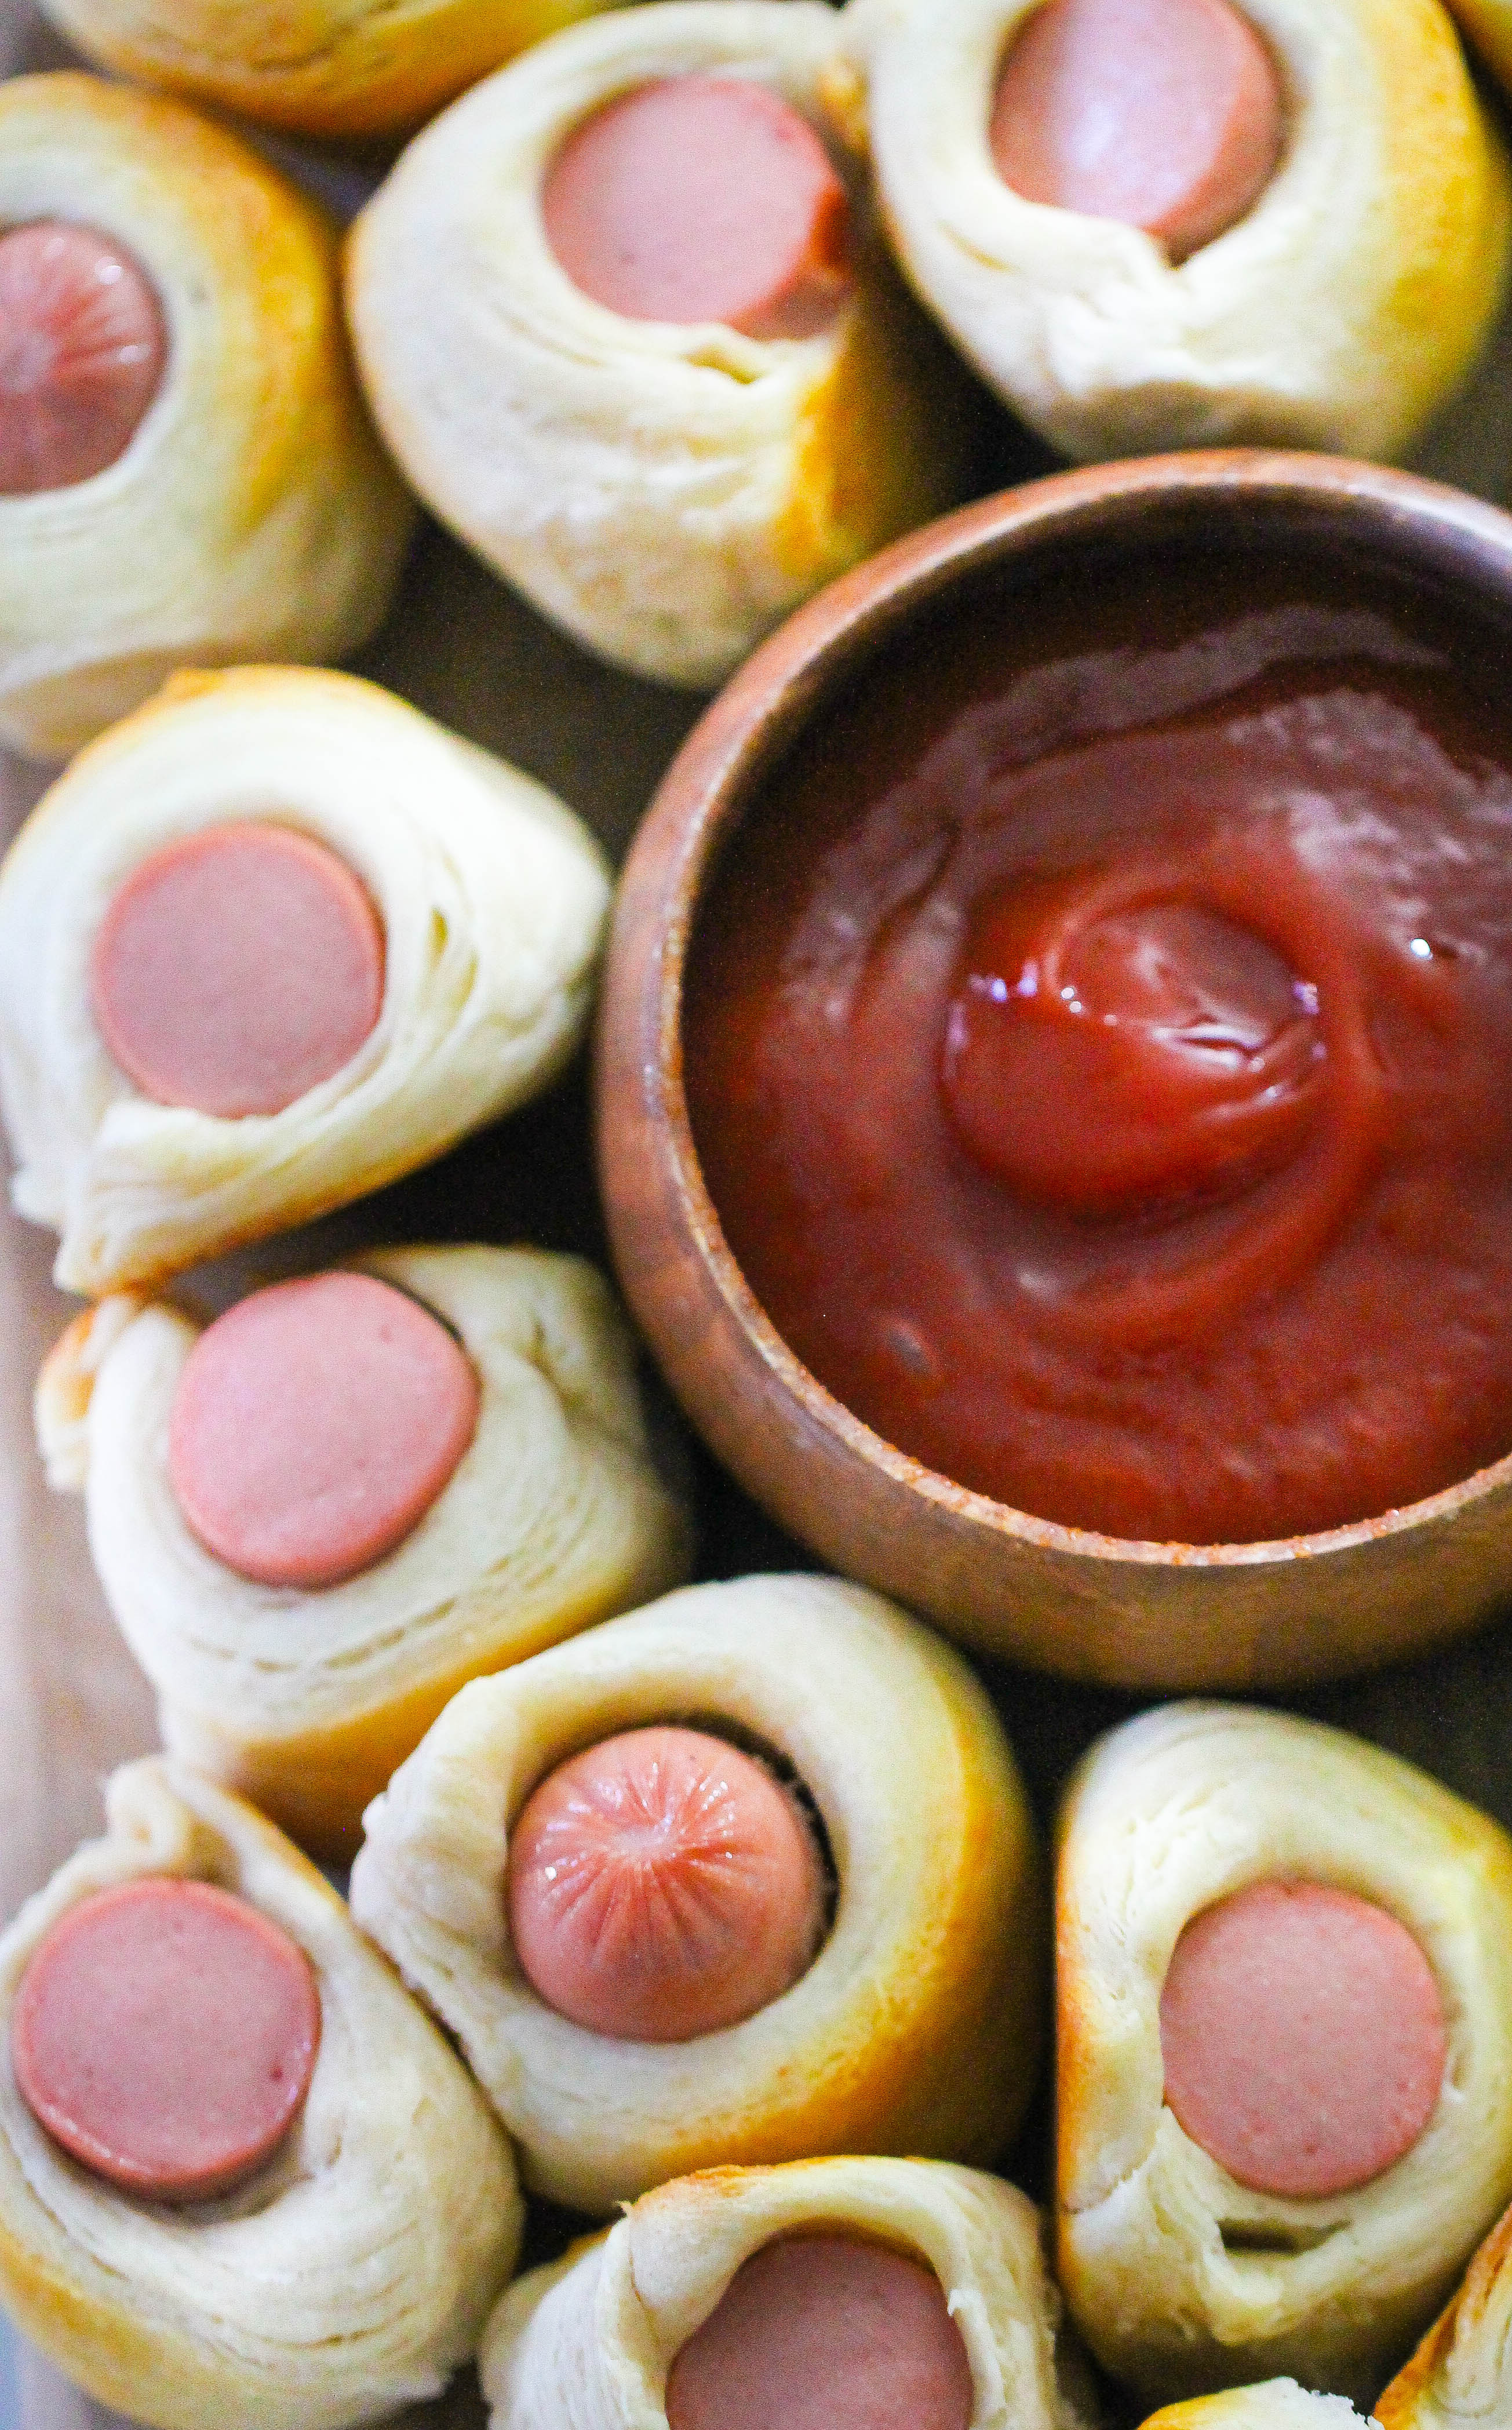 Classic Pigs in a Blanket with ketchup